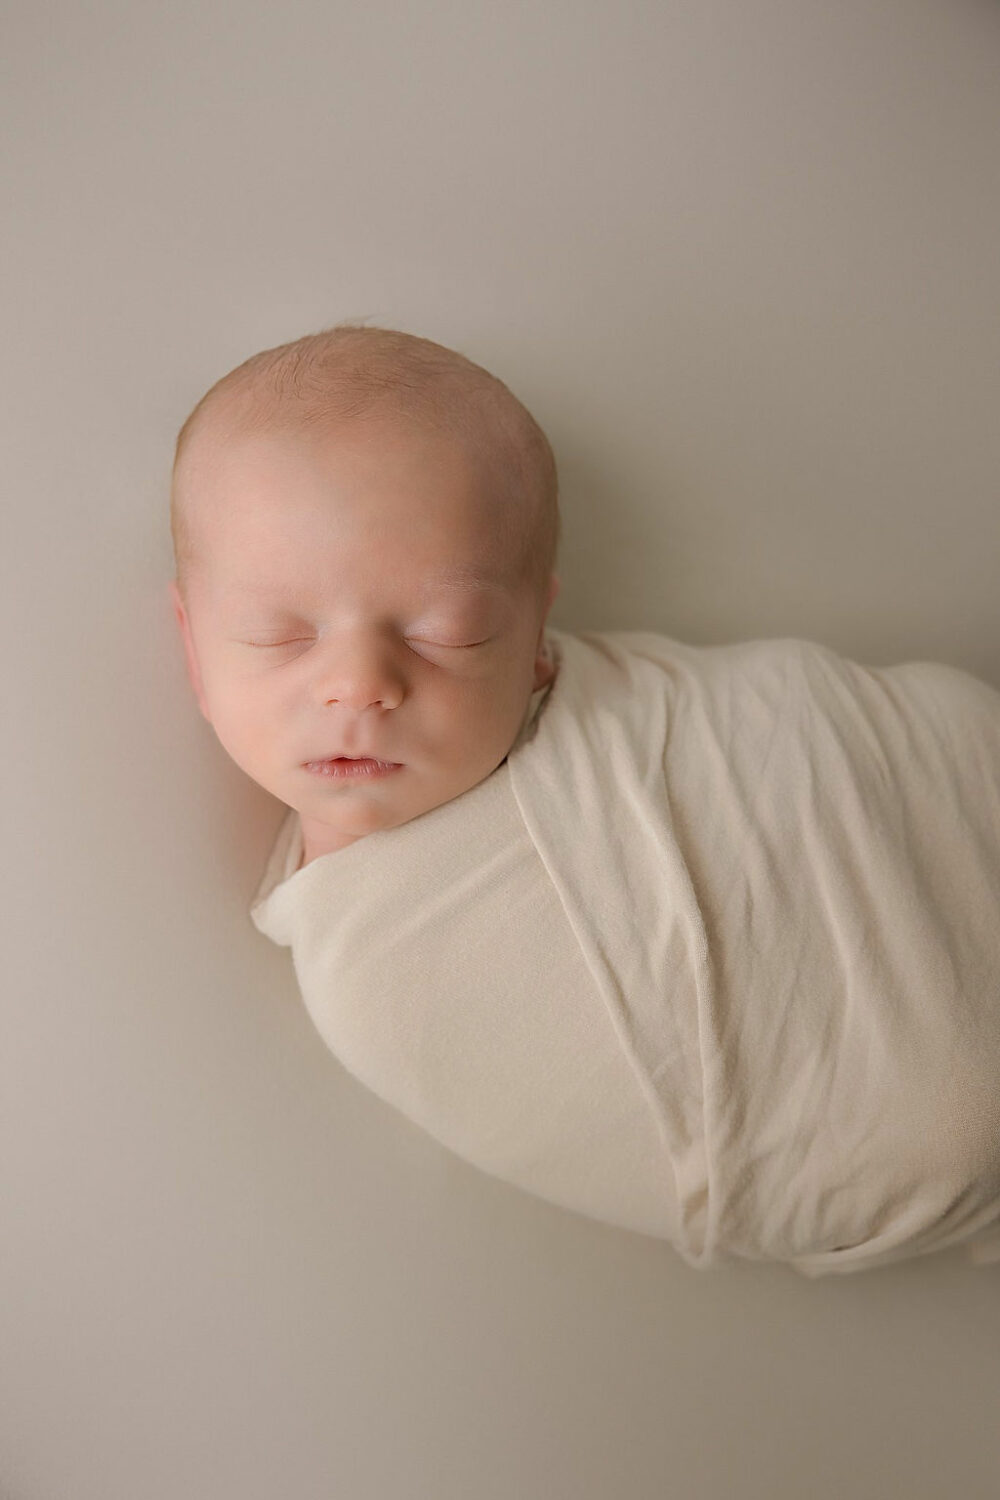 Sleeping newborn boy posed for his infant portrait, sleeping in swaddle for his professional, baby pictures, taken during a twin neutral newborn session in Moorestown, New Jersey.